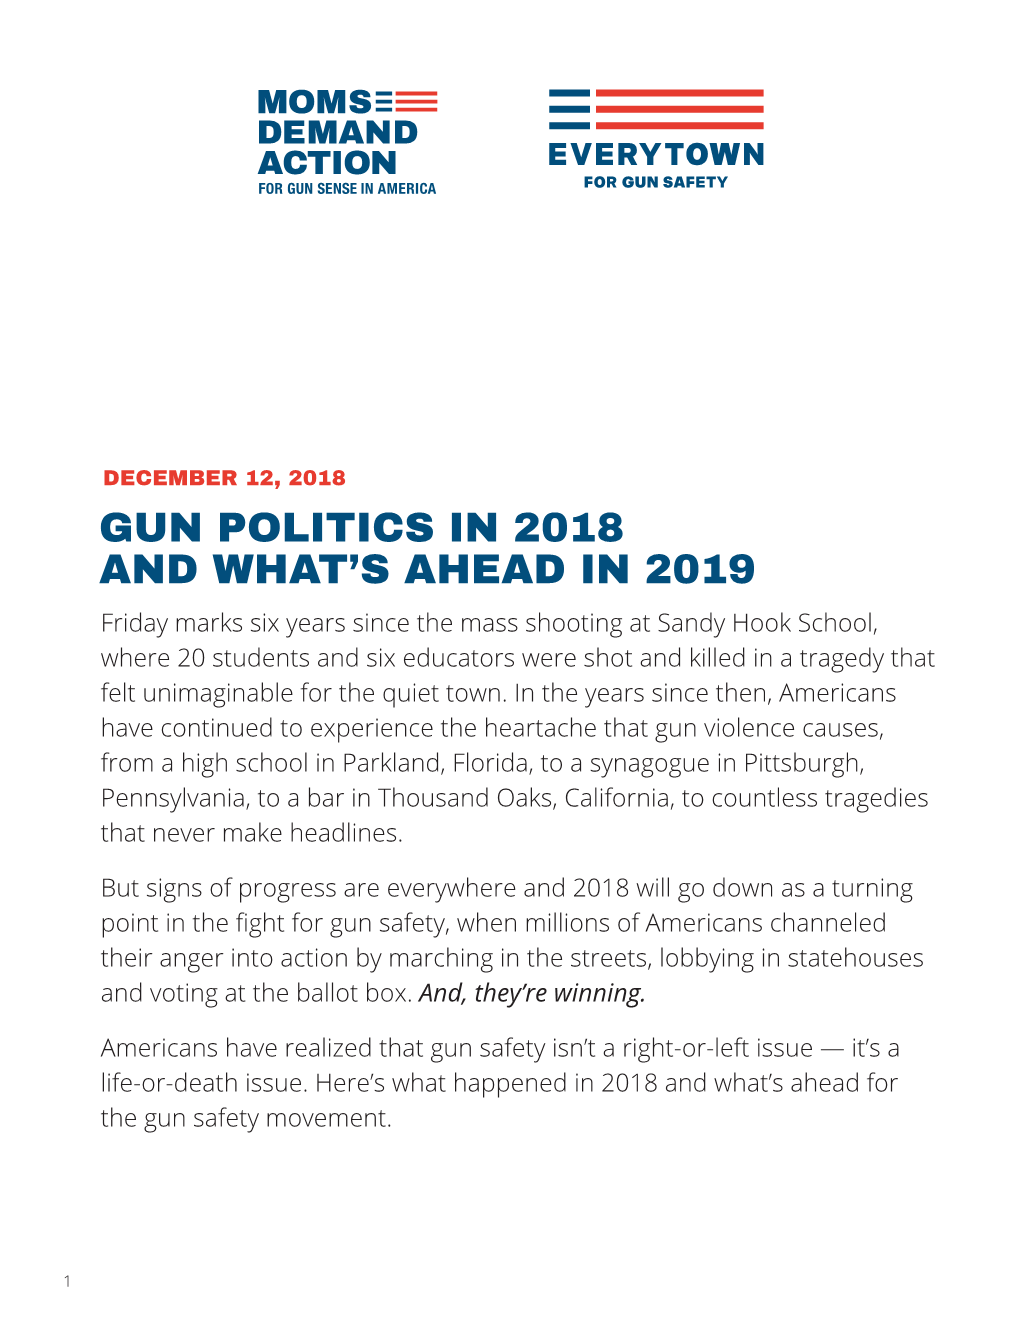 Gun Politics in 2018 and What's Ahead in 2019